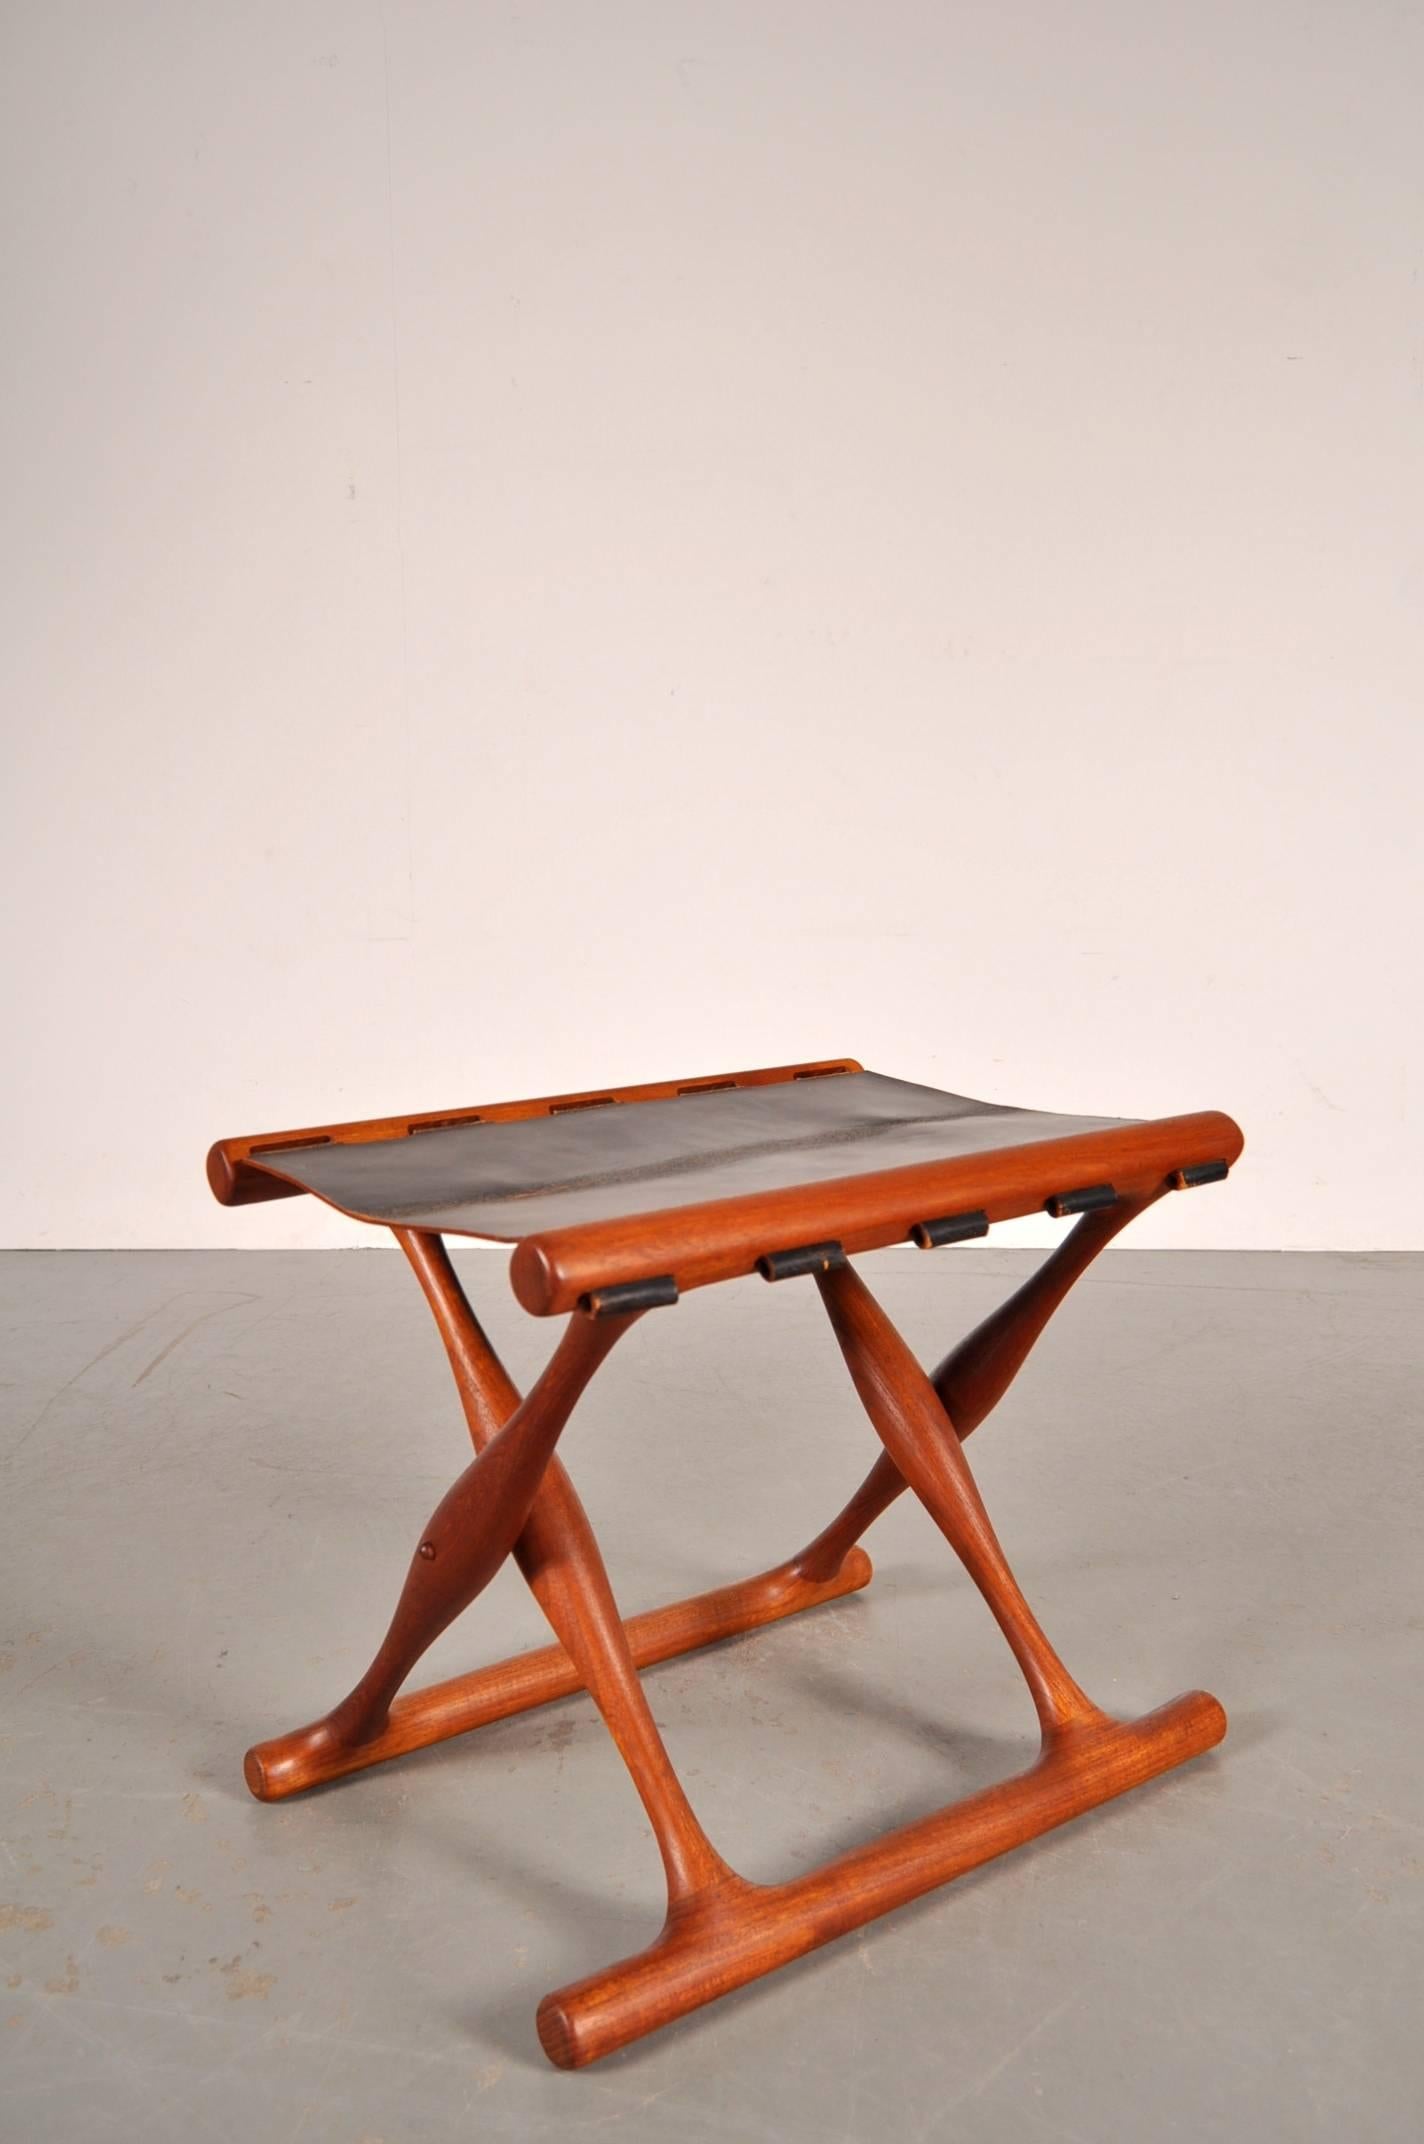 Mid-Century Modern Folding Stool with Tray by Poul Hundevad for Domus Danica, Denmark, circa 1950